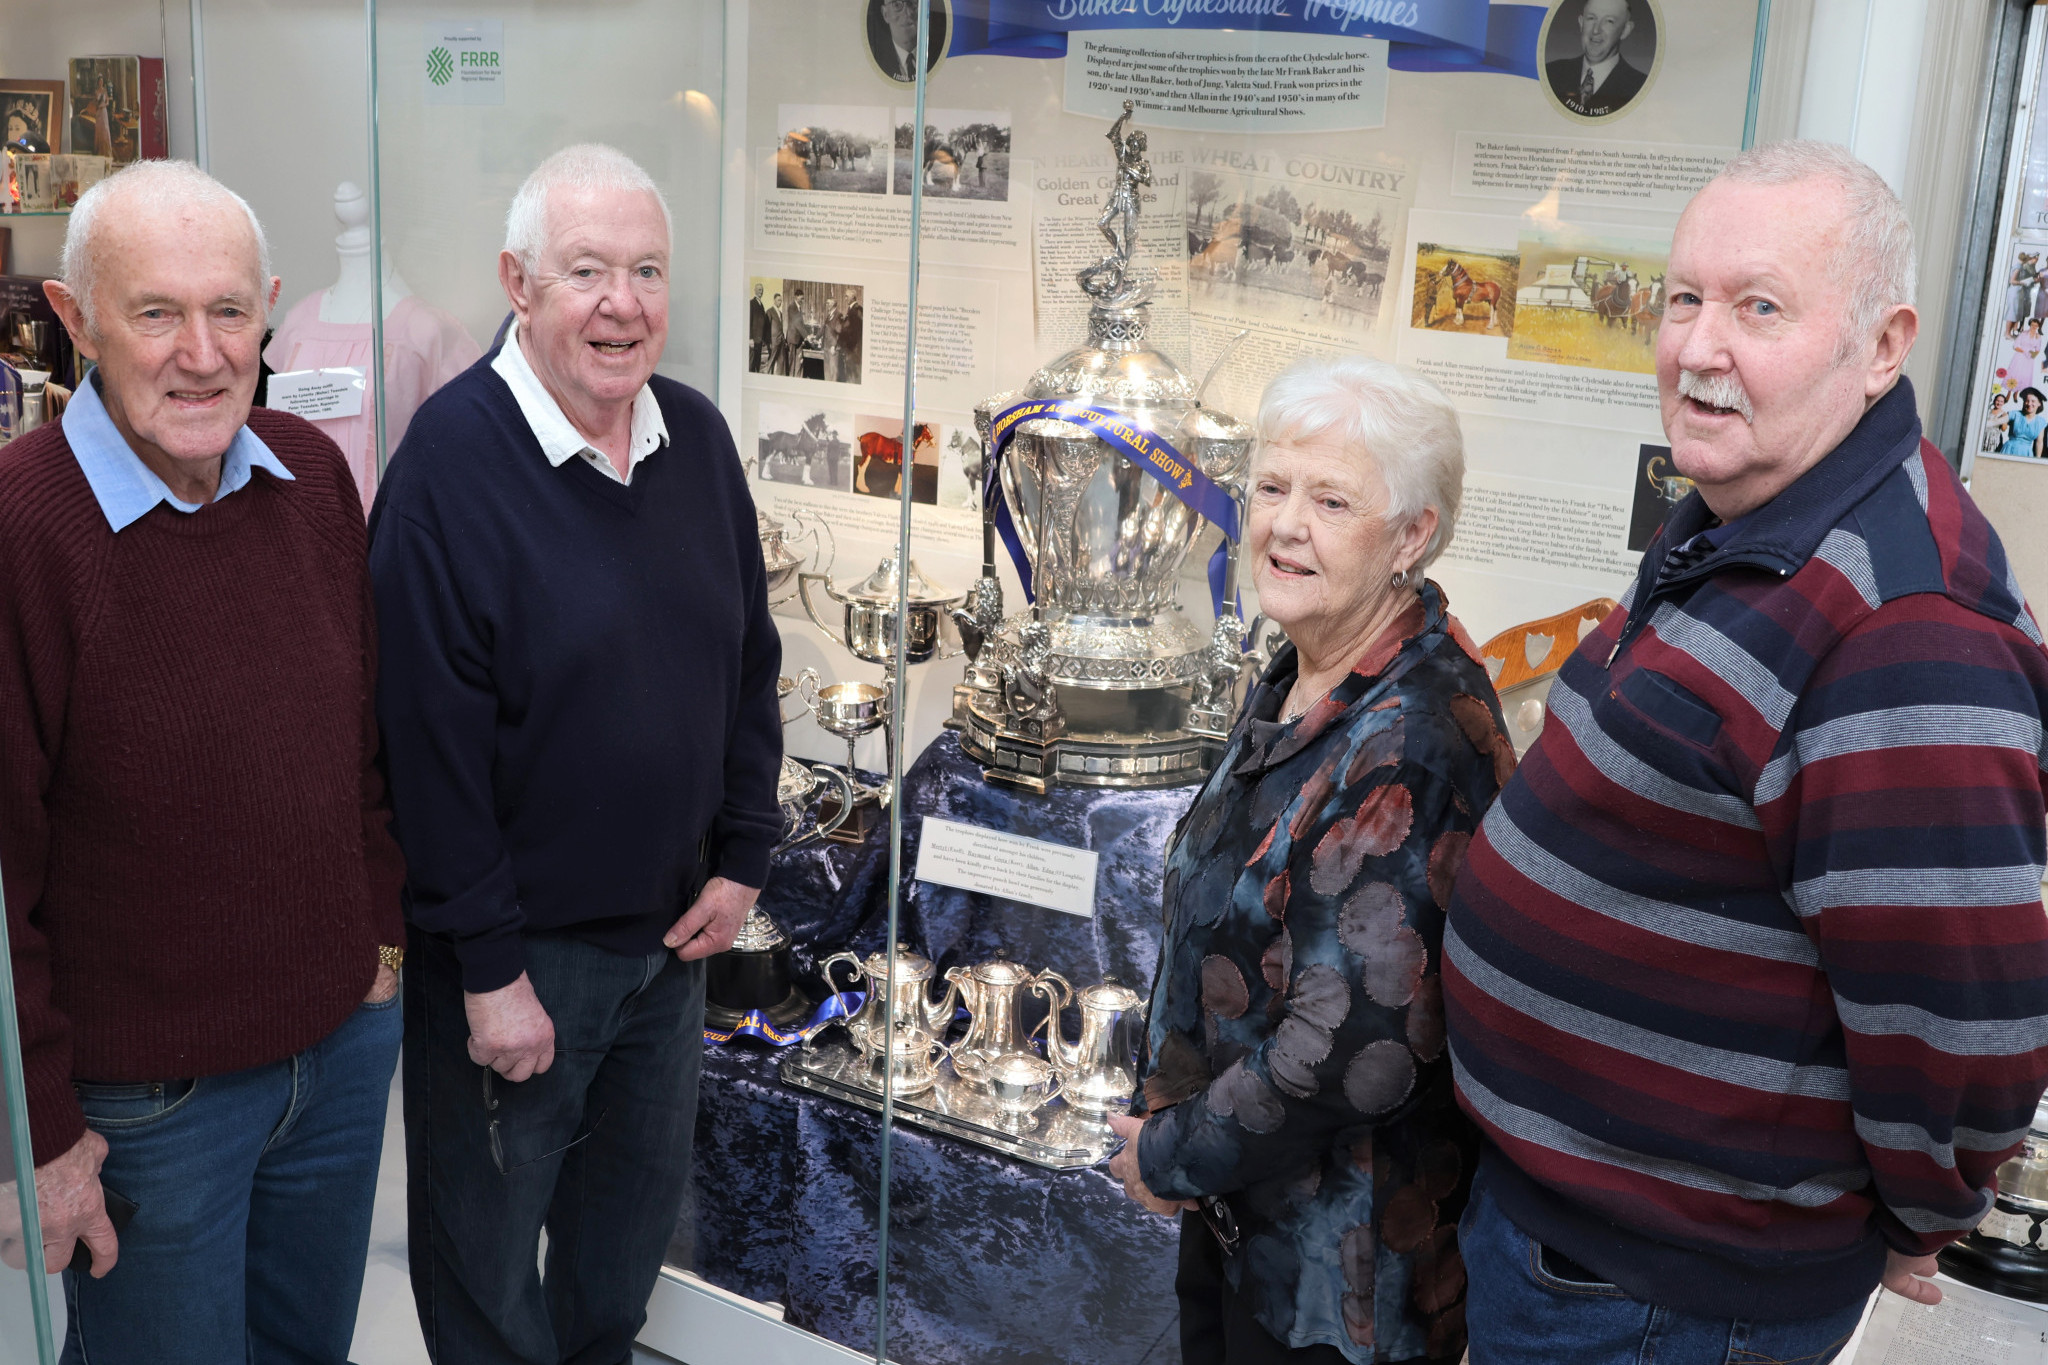 Family of Bakers who had procession of the very large trophy and wished to see it publicly displayed with all the other trophies won by their father (Alan Baker) and grandfather (Frank Baker).